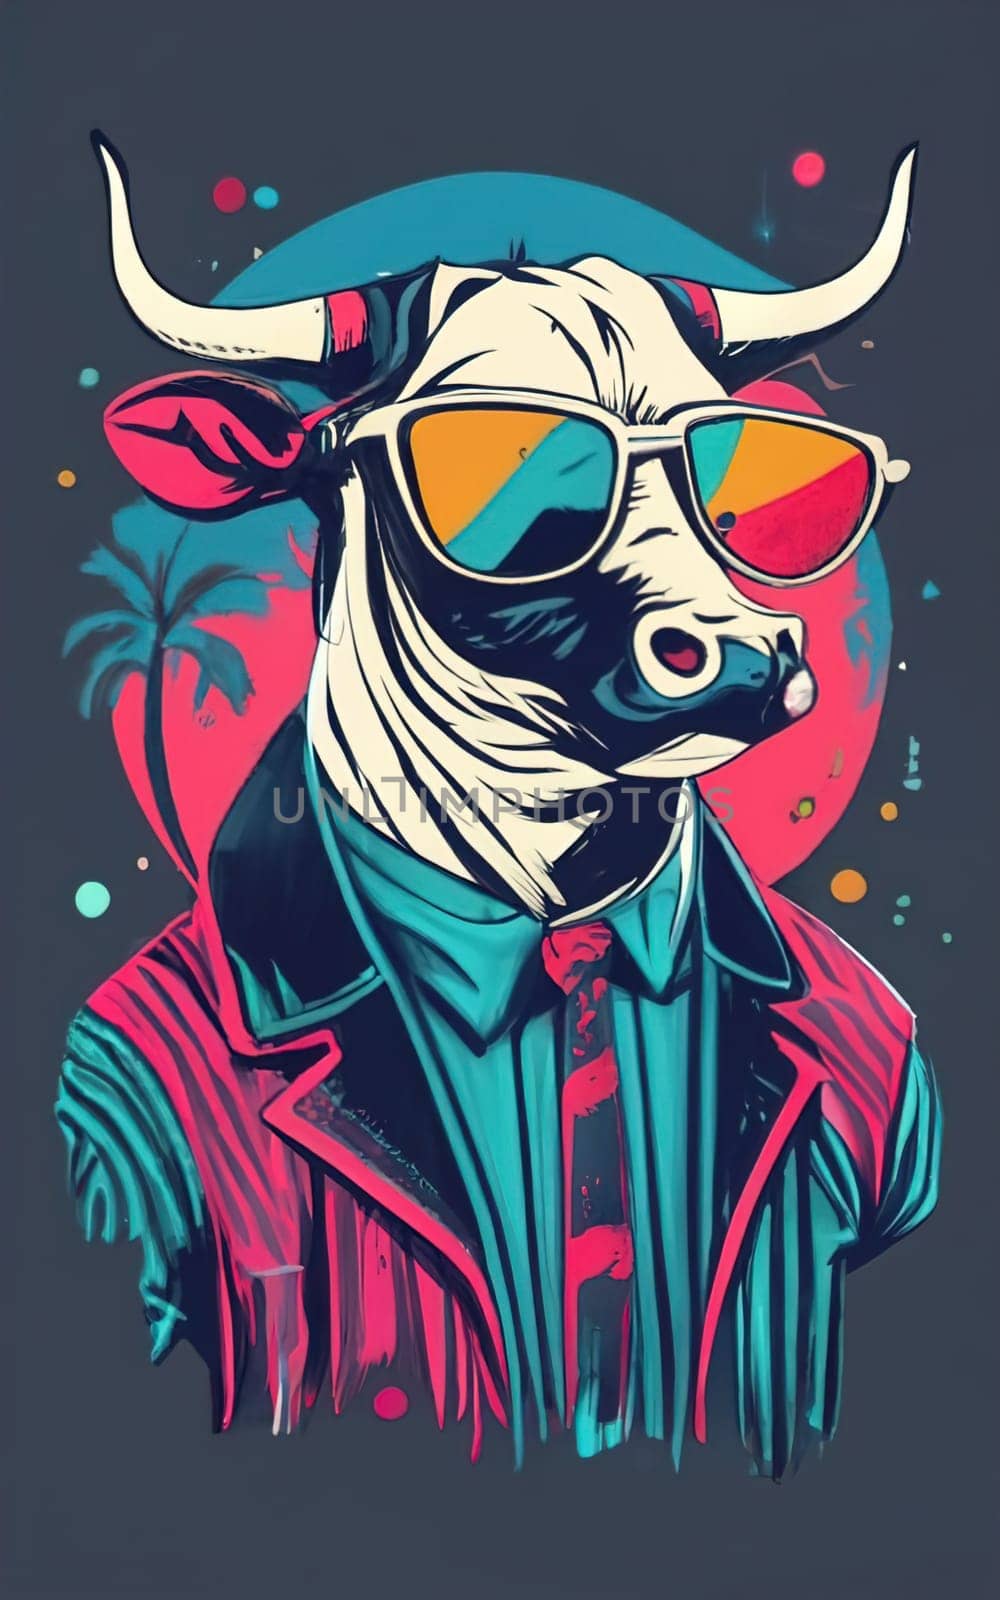 T-shirt Bull with horns wearing sunglasses, minimalist ink drawing style, retro vibes, retro colors, silhouette, pop art style, concept art download image